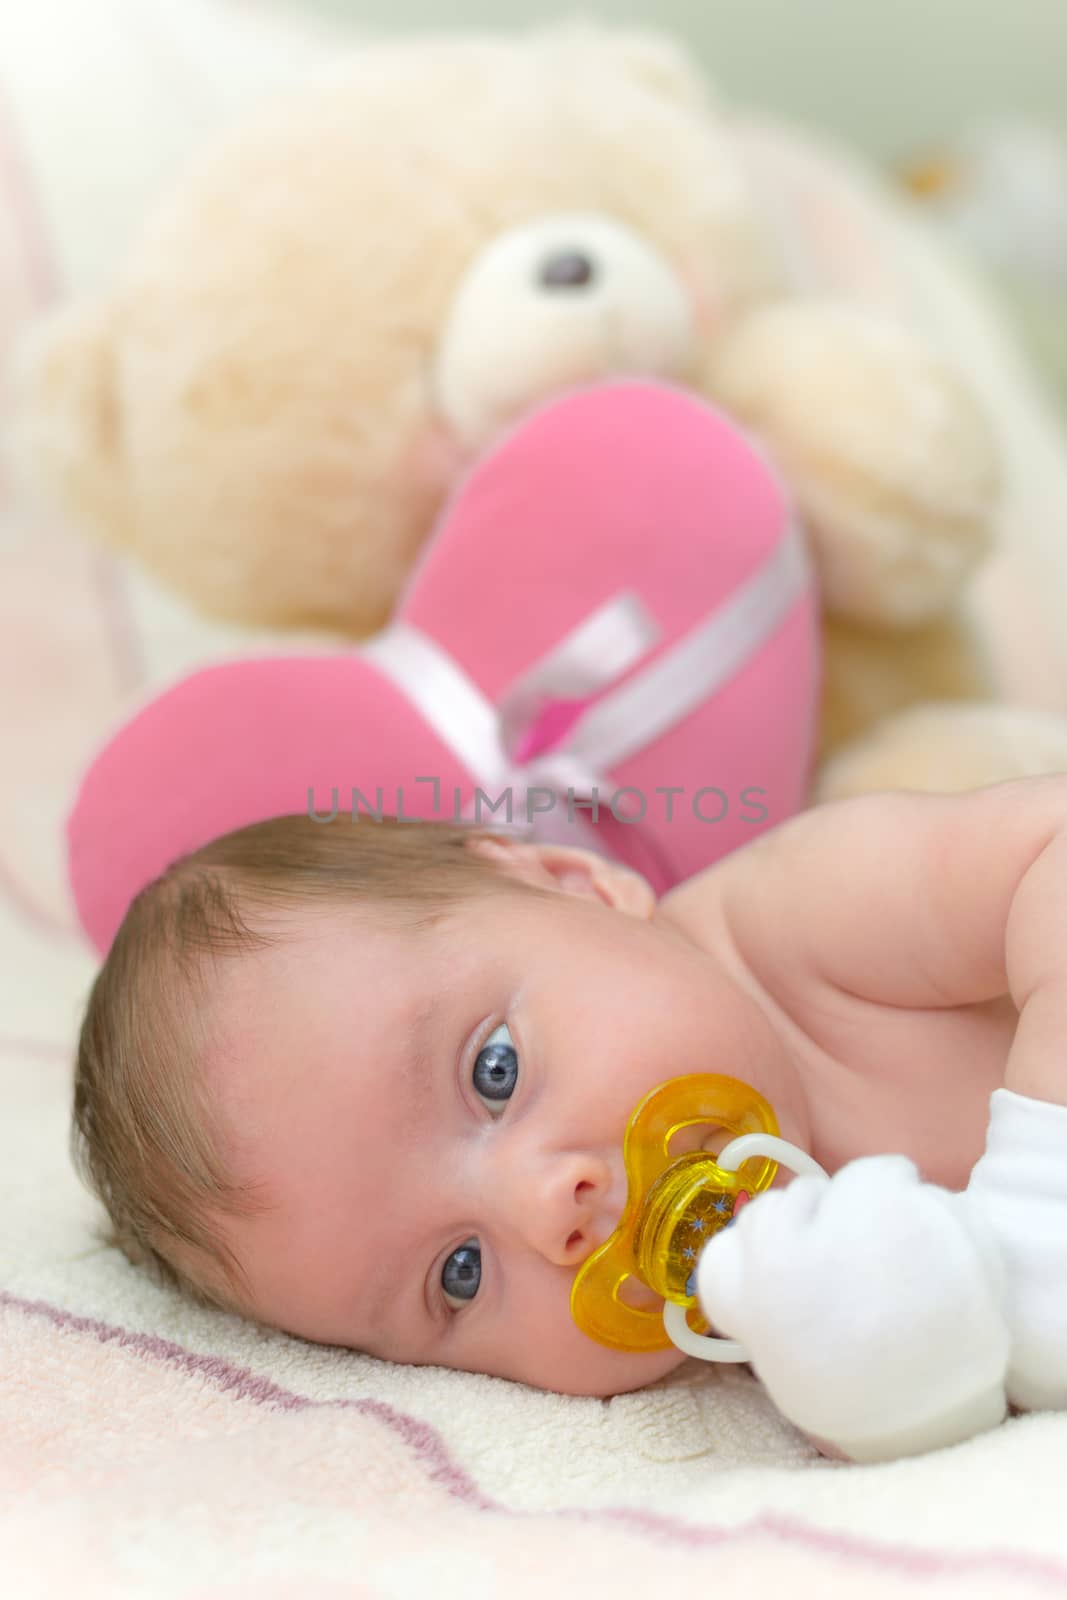 Infant baby (1 month old) lying on bed by only4denn